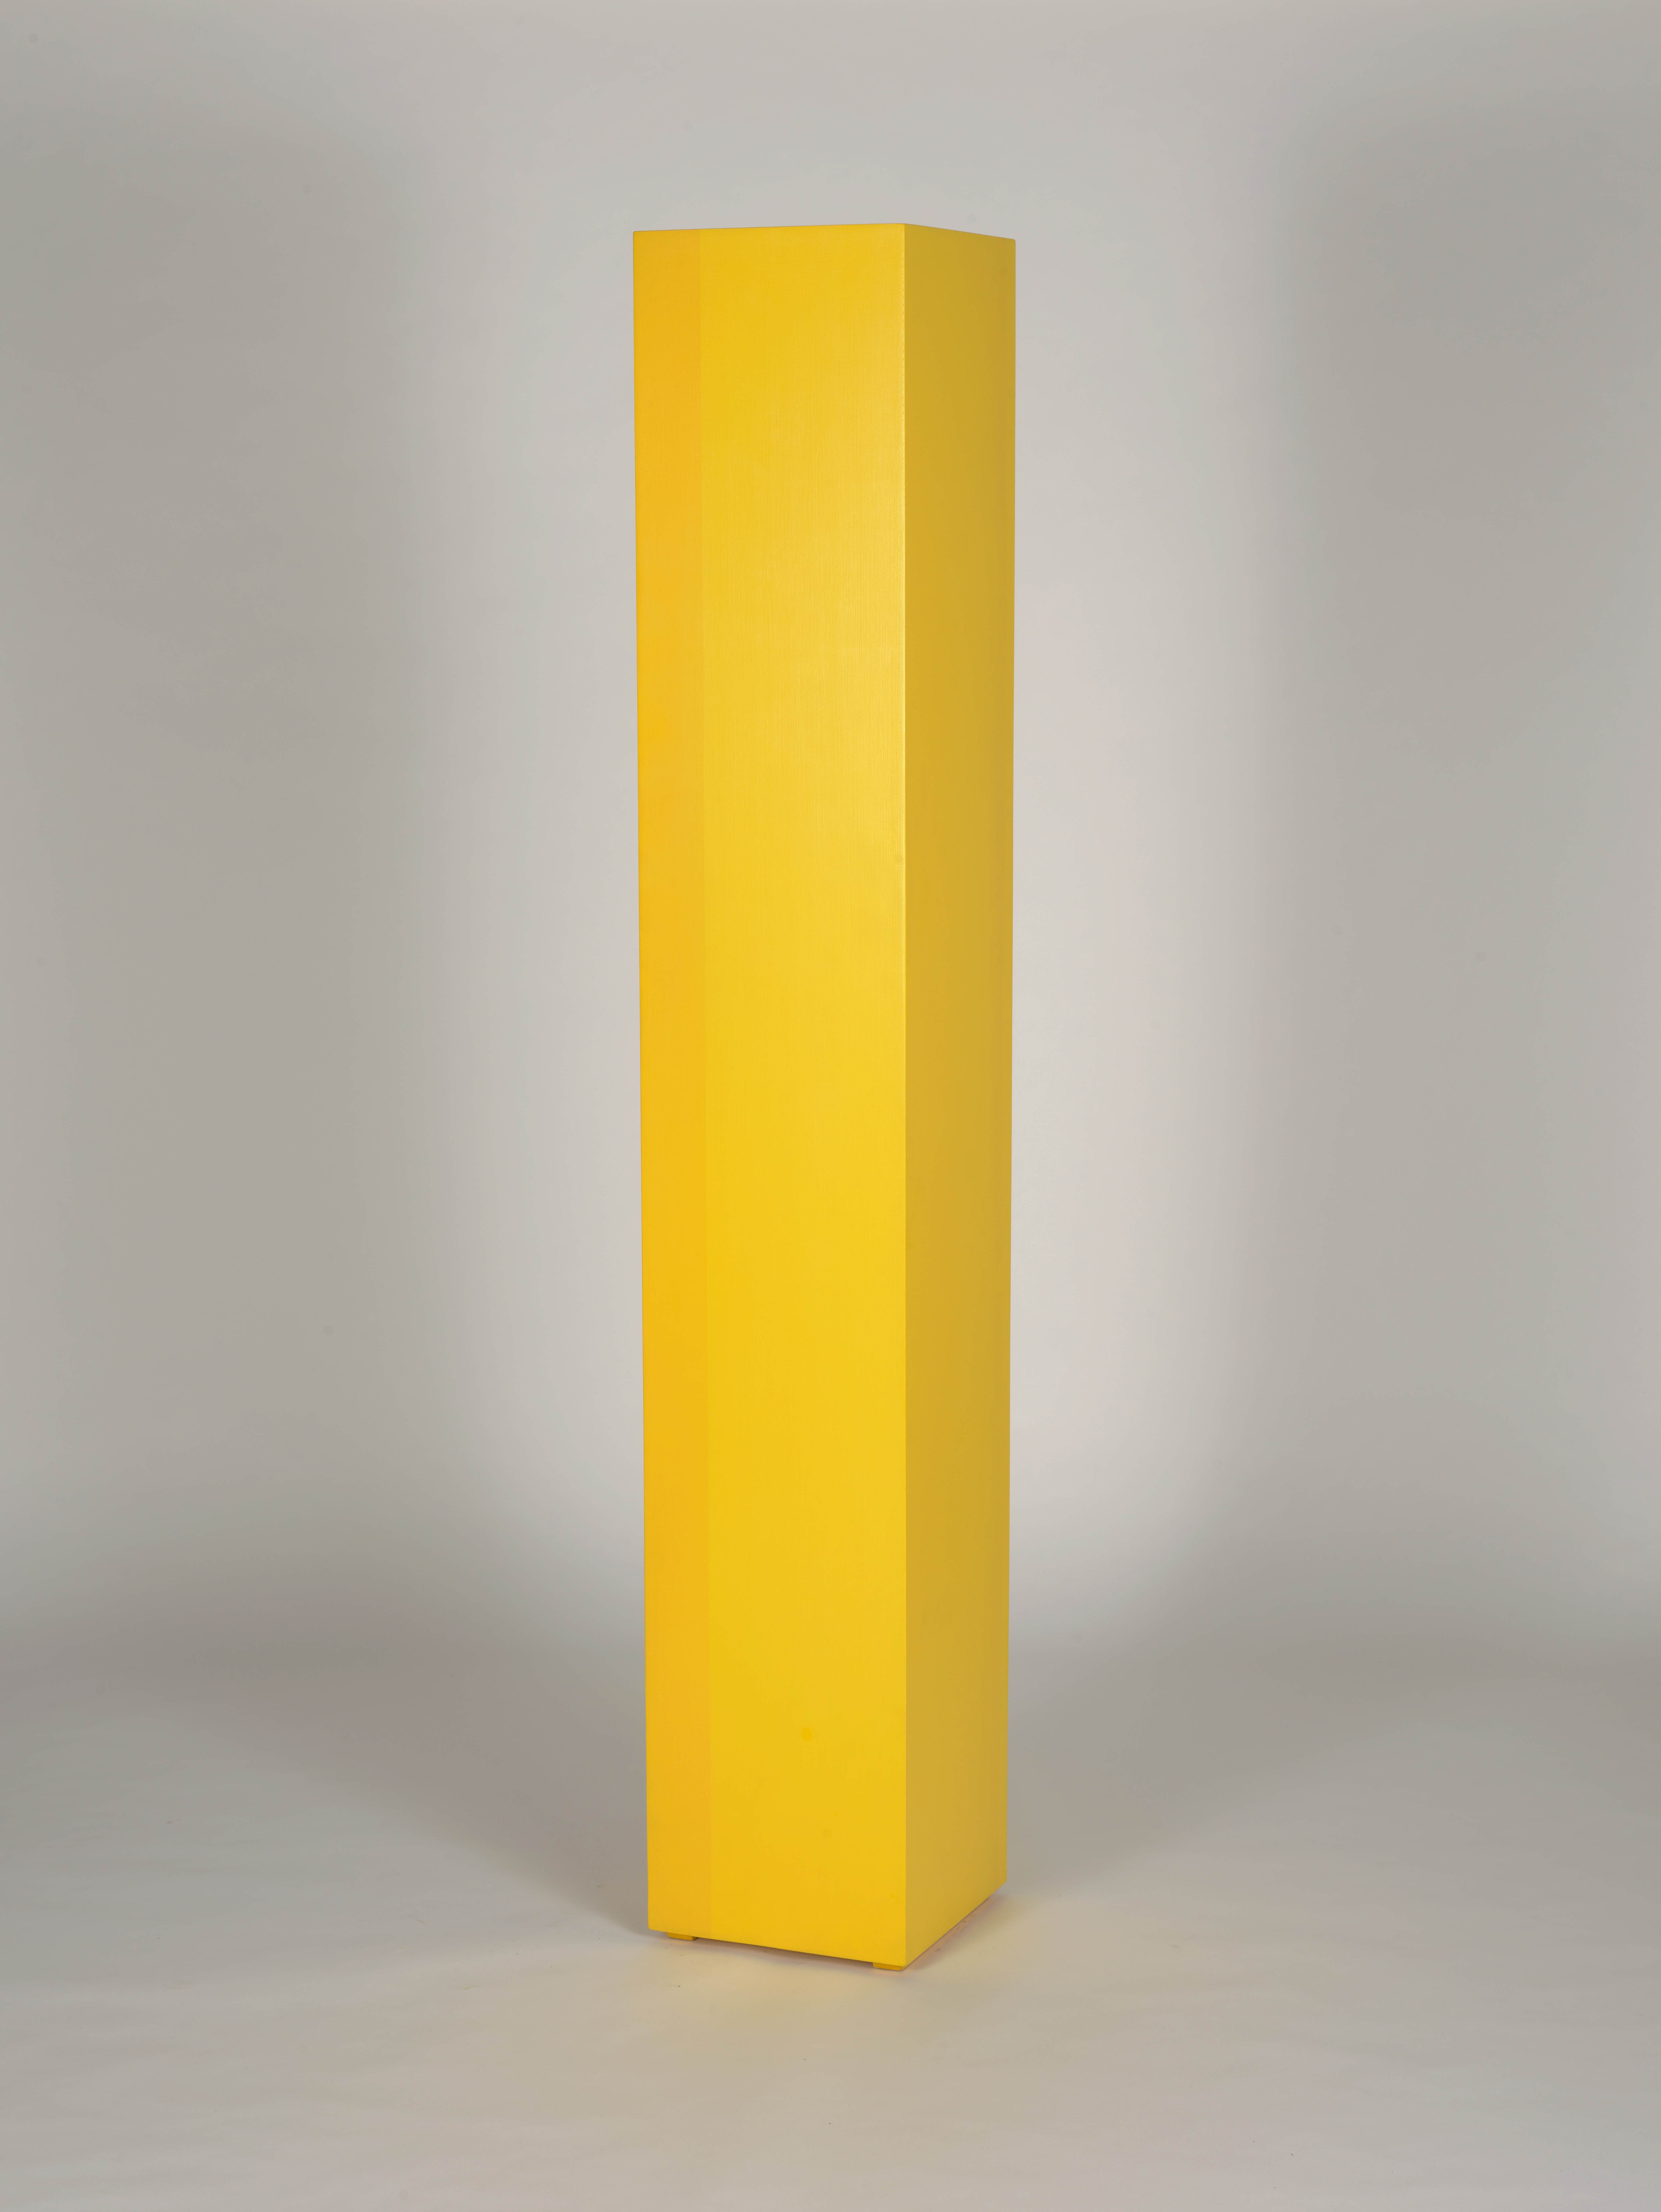 Rectangular sculpture painted in shades of yellow